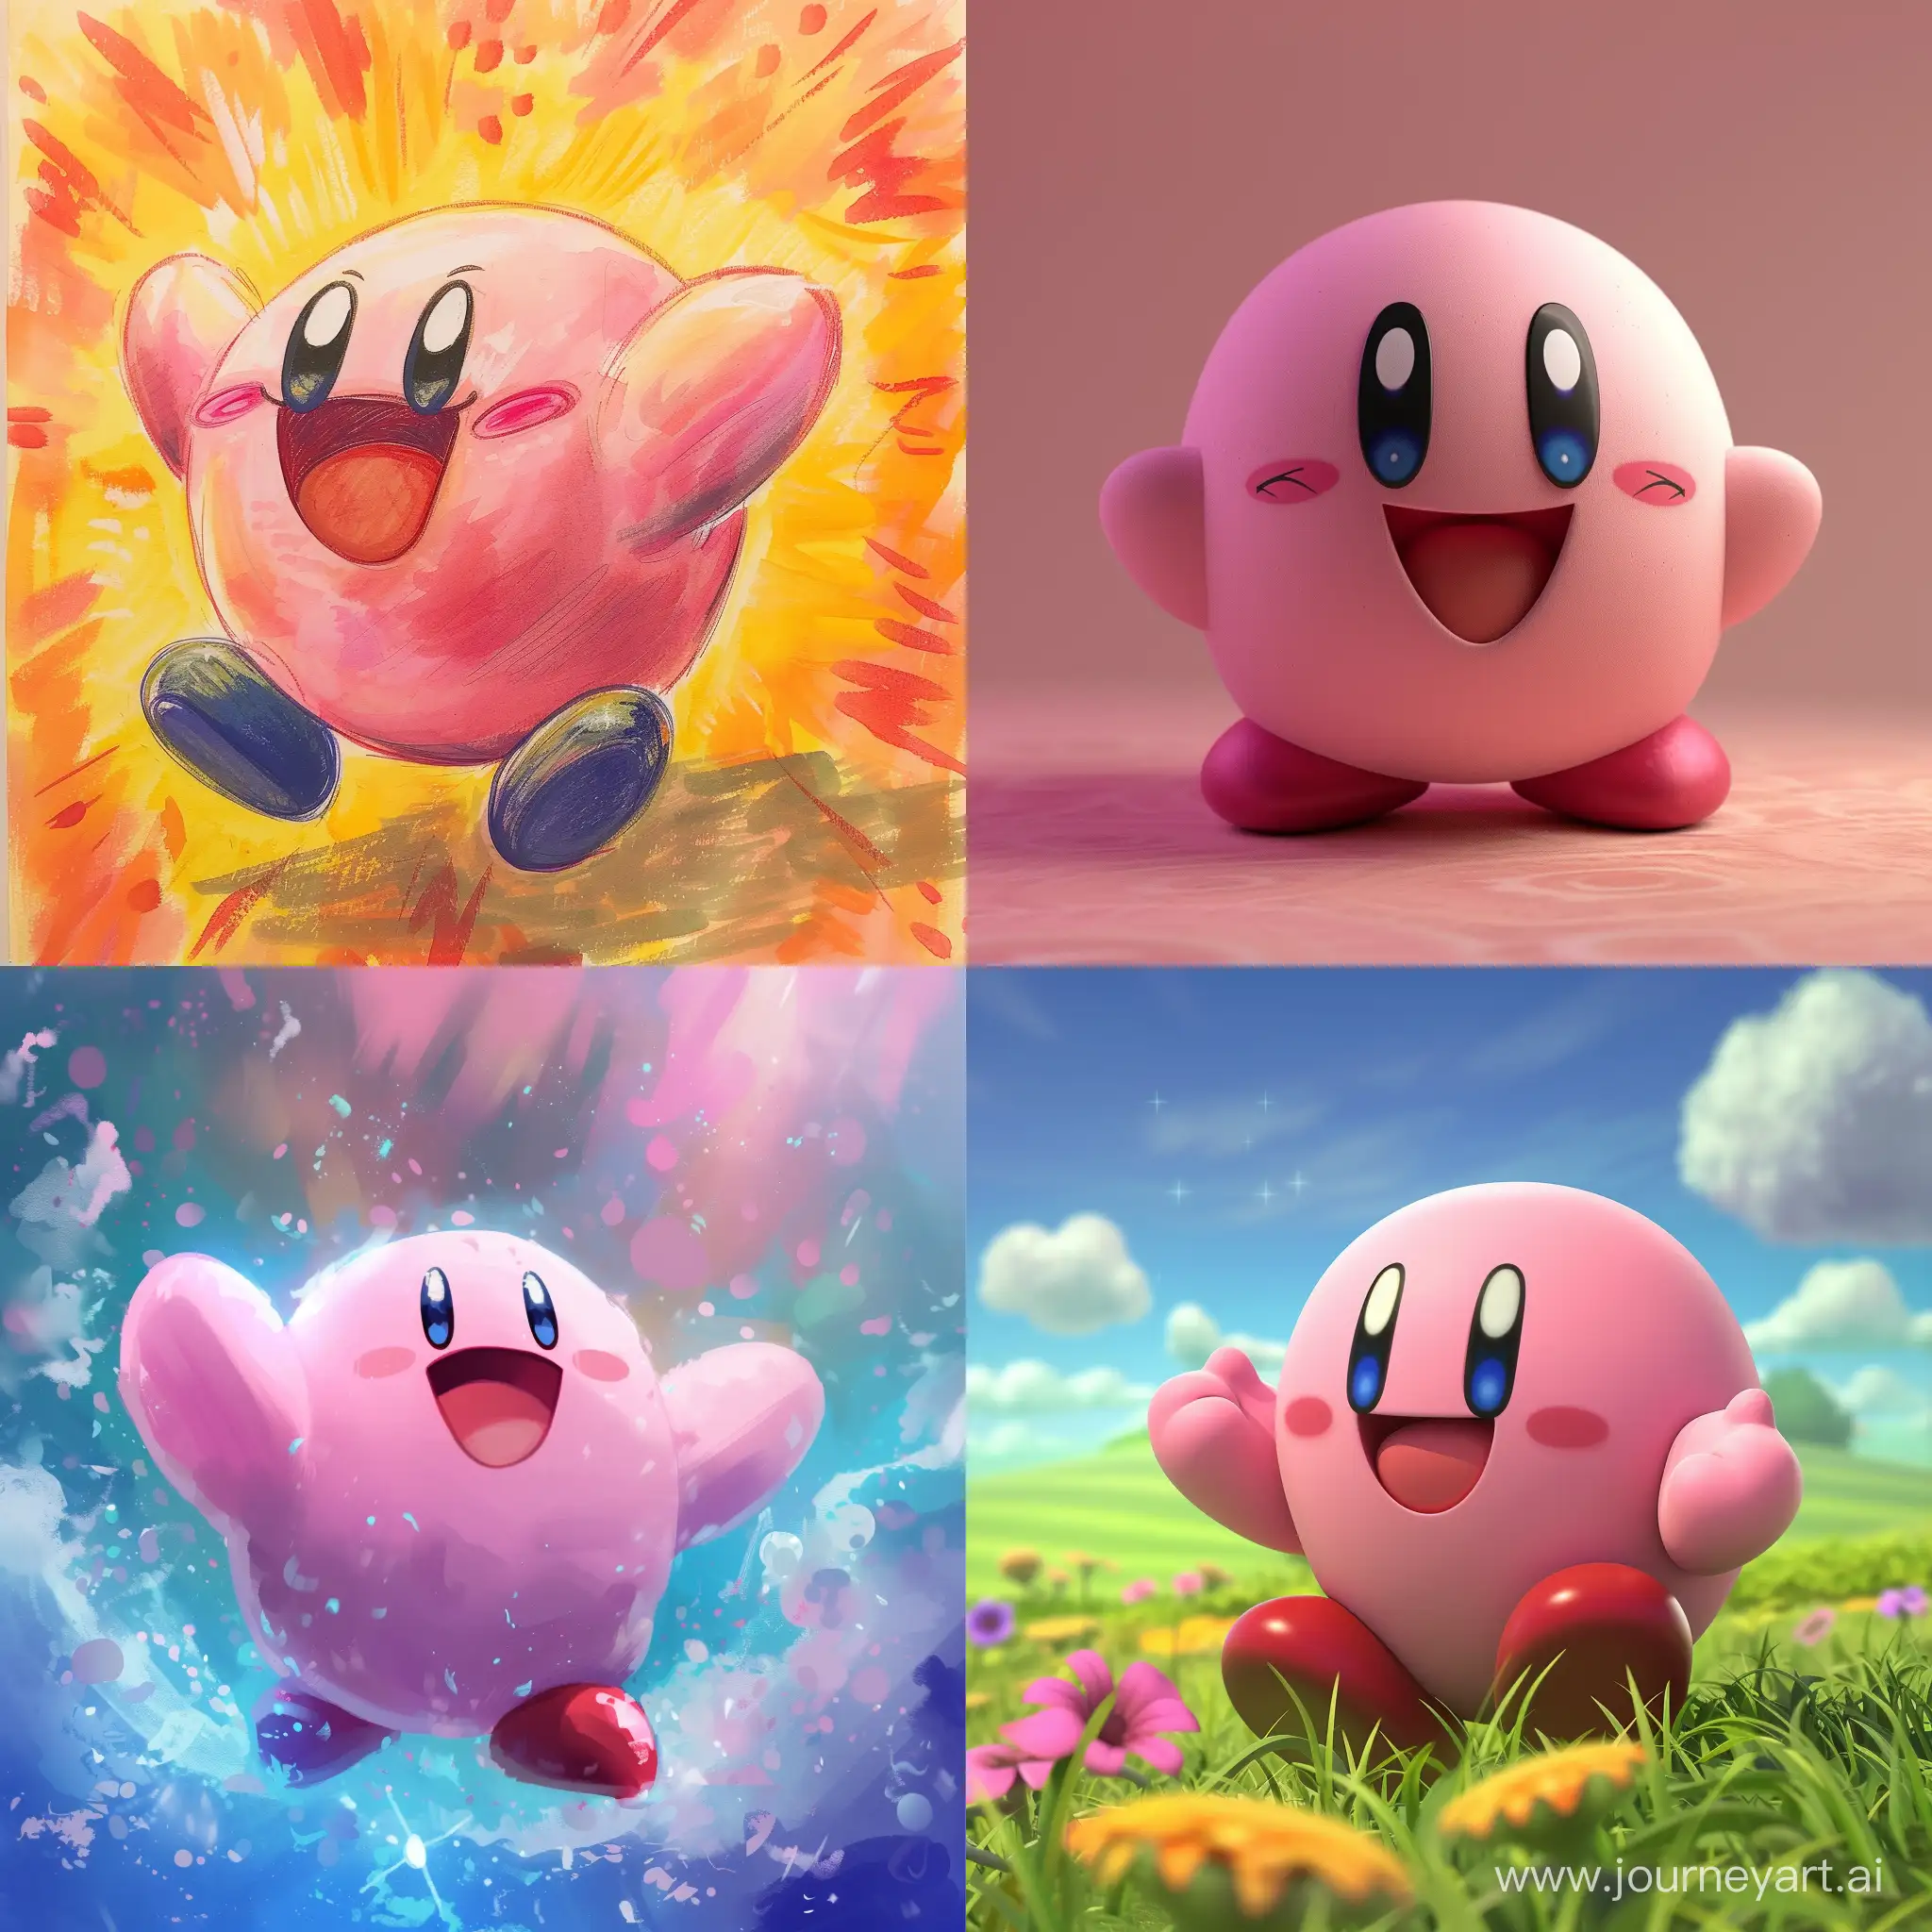 Joyful-Kirby-Cute-Smiling-Character-in-a-Vibrant-Environment